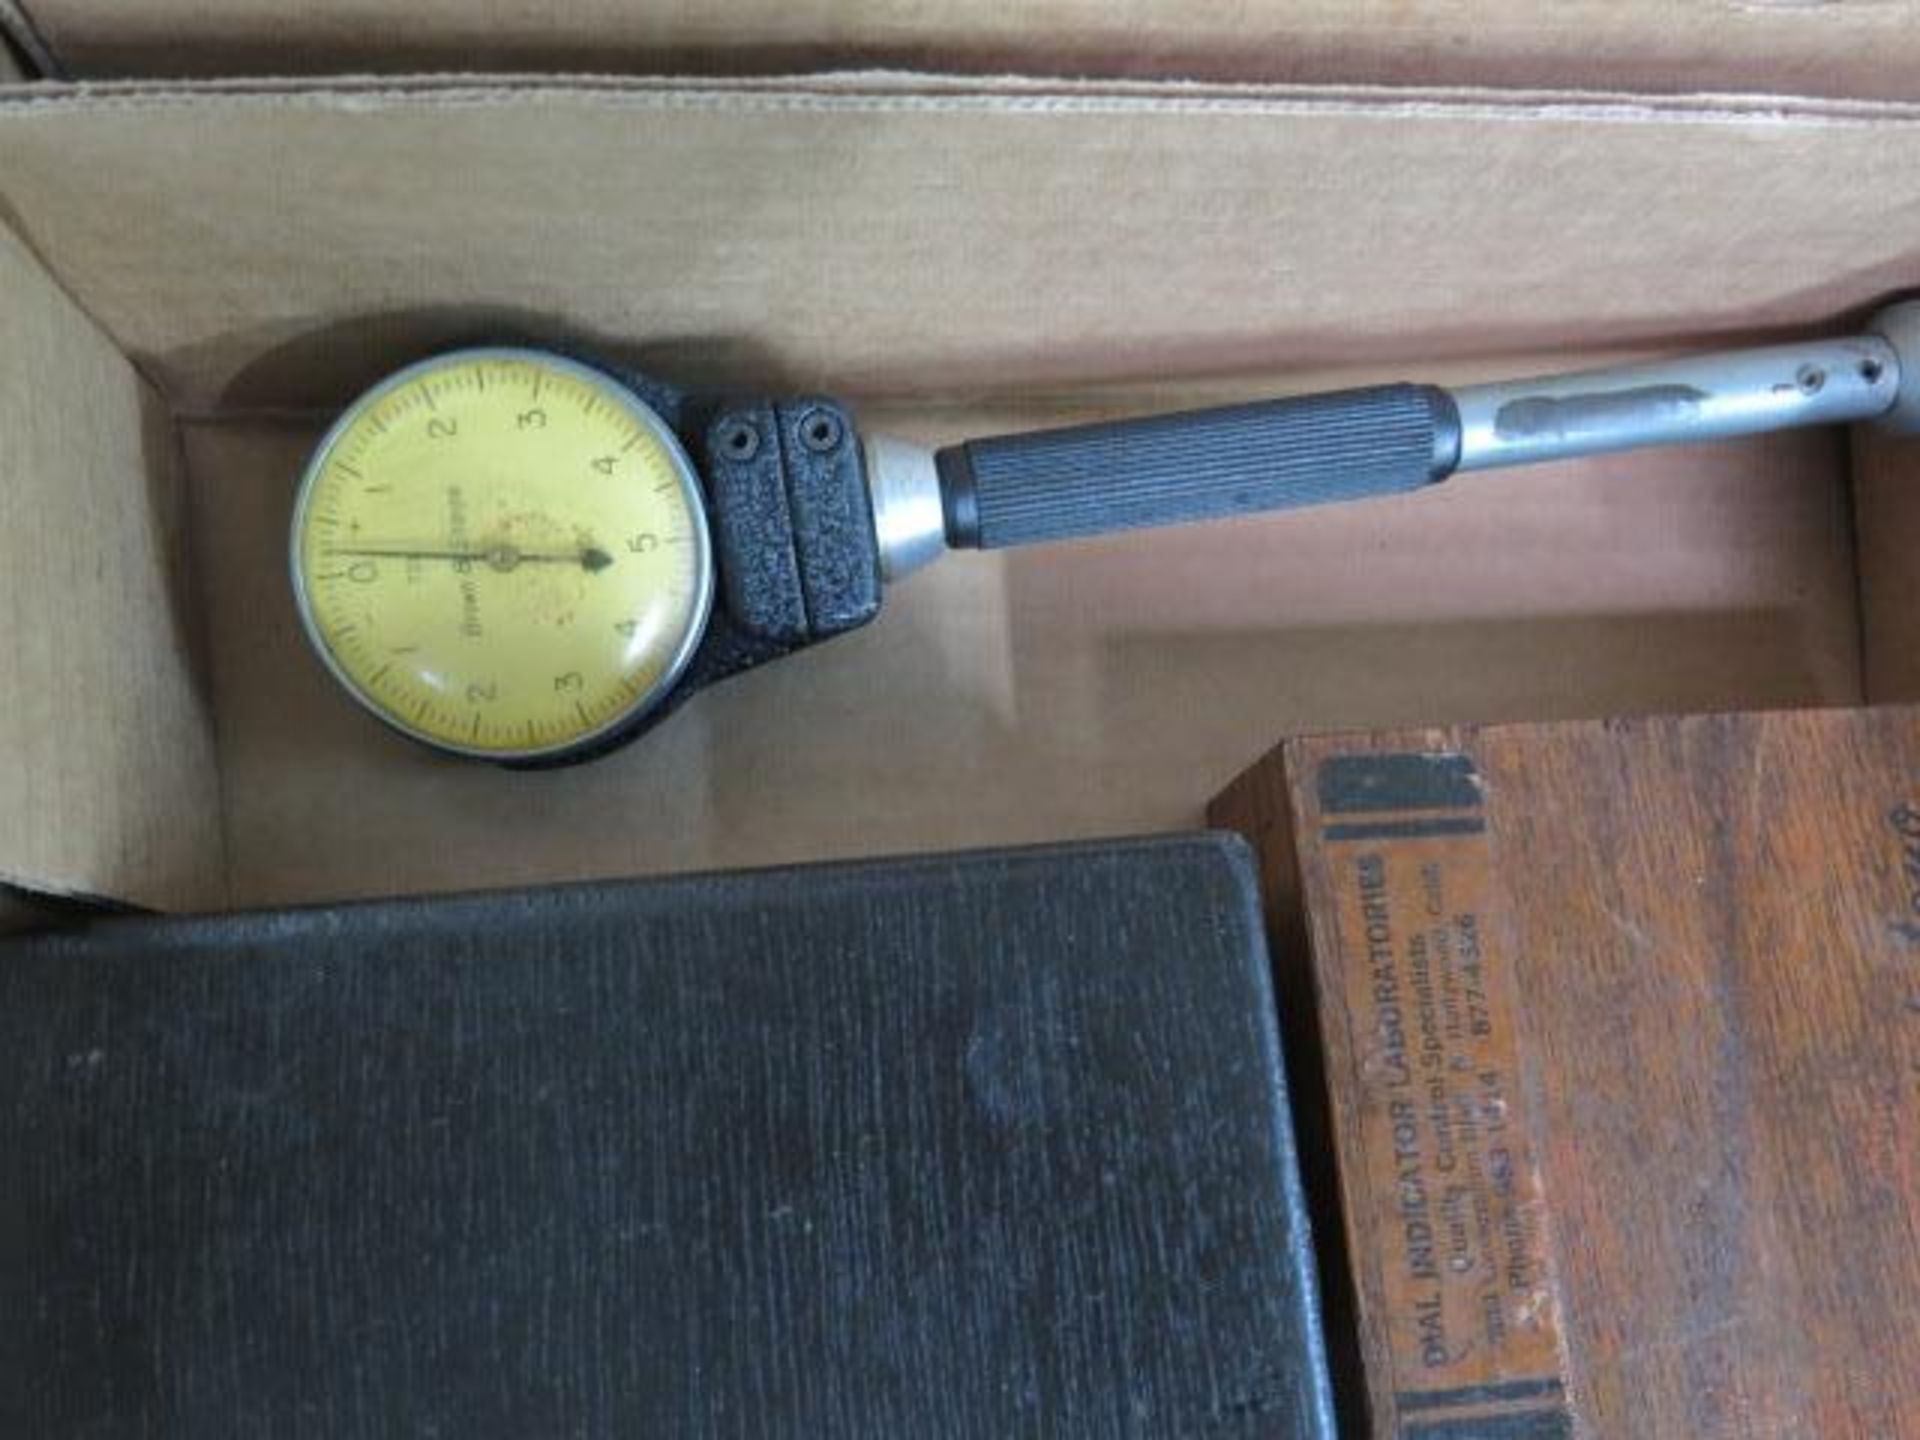 Teclock 2”-6” Dial Bore Gage, Mitutoyo .7”-1.4” Dial Bore Gage and Boice Dial Bore Gage (SOLD AS- - Image 5 of 5